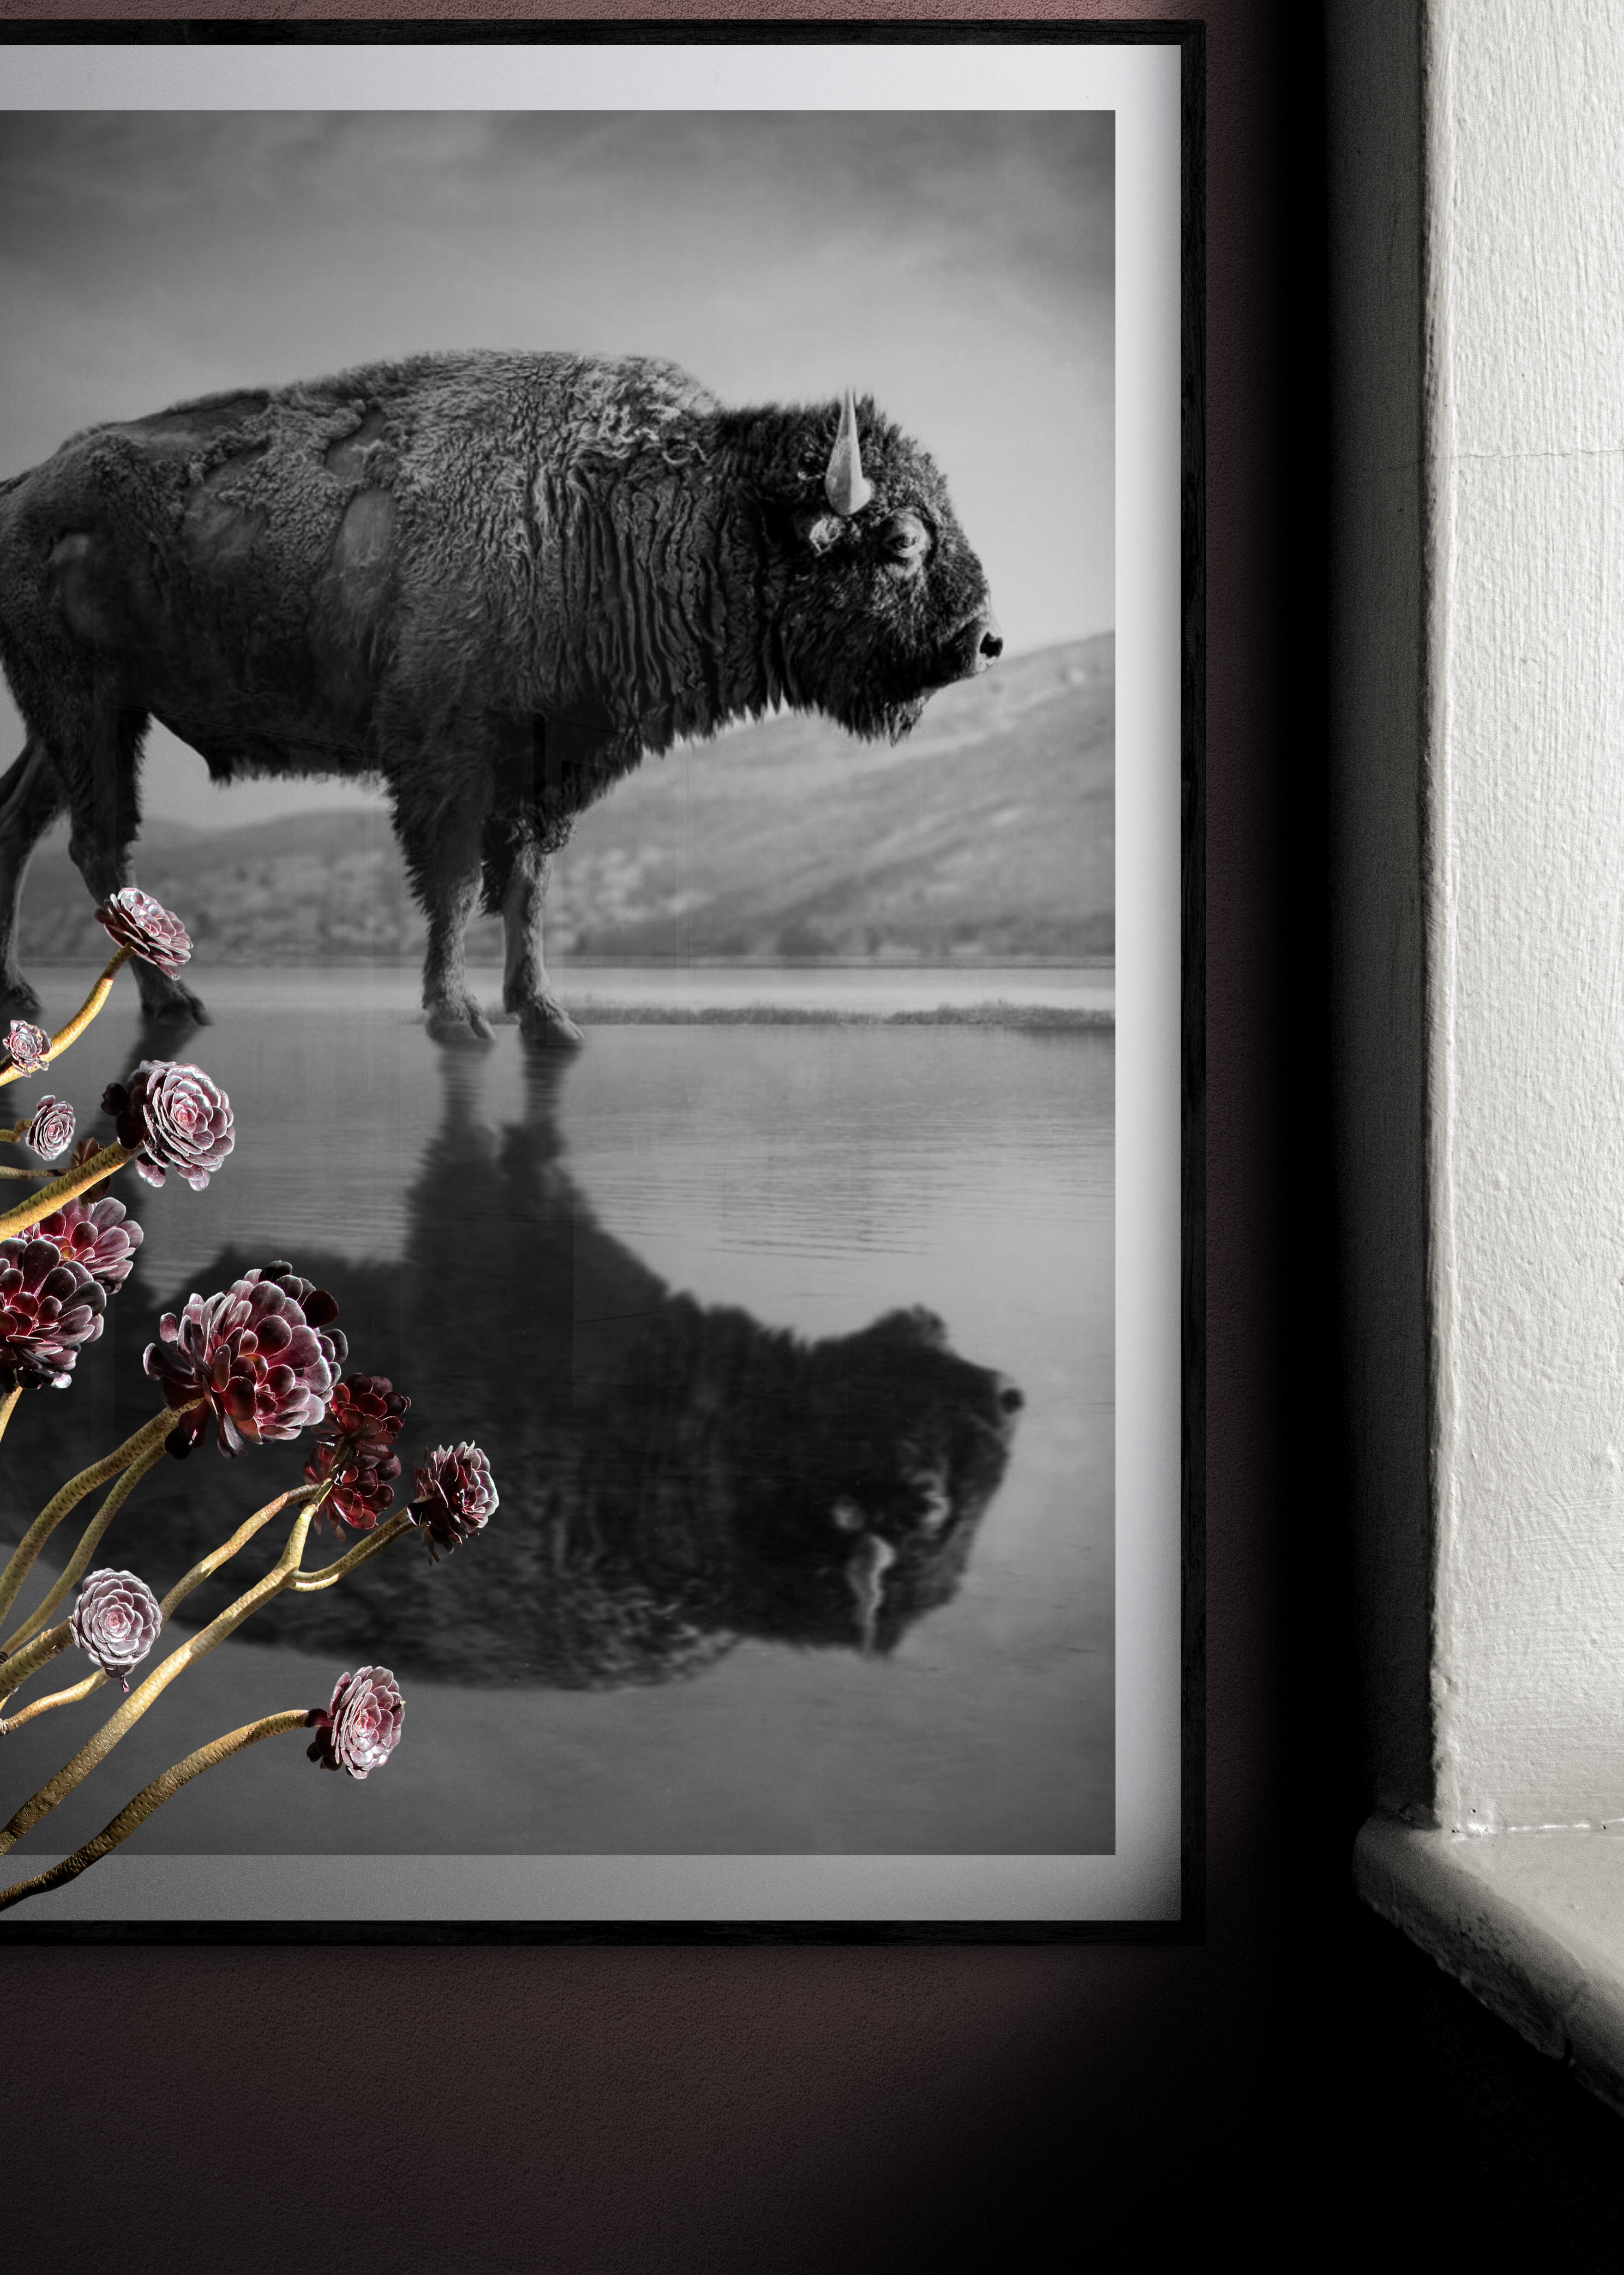 This is a contemporary photograph of an American Bison. 
Printed on archival paper and using archival inks
Framing available. Inquire for rates. 
Signed Edition of 5

Shane Russeck has built a reputation for capturing America's landscapes, cultures